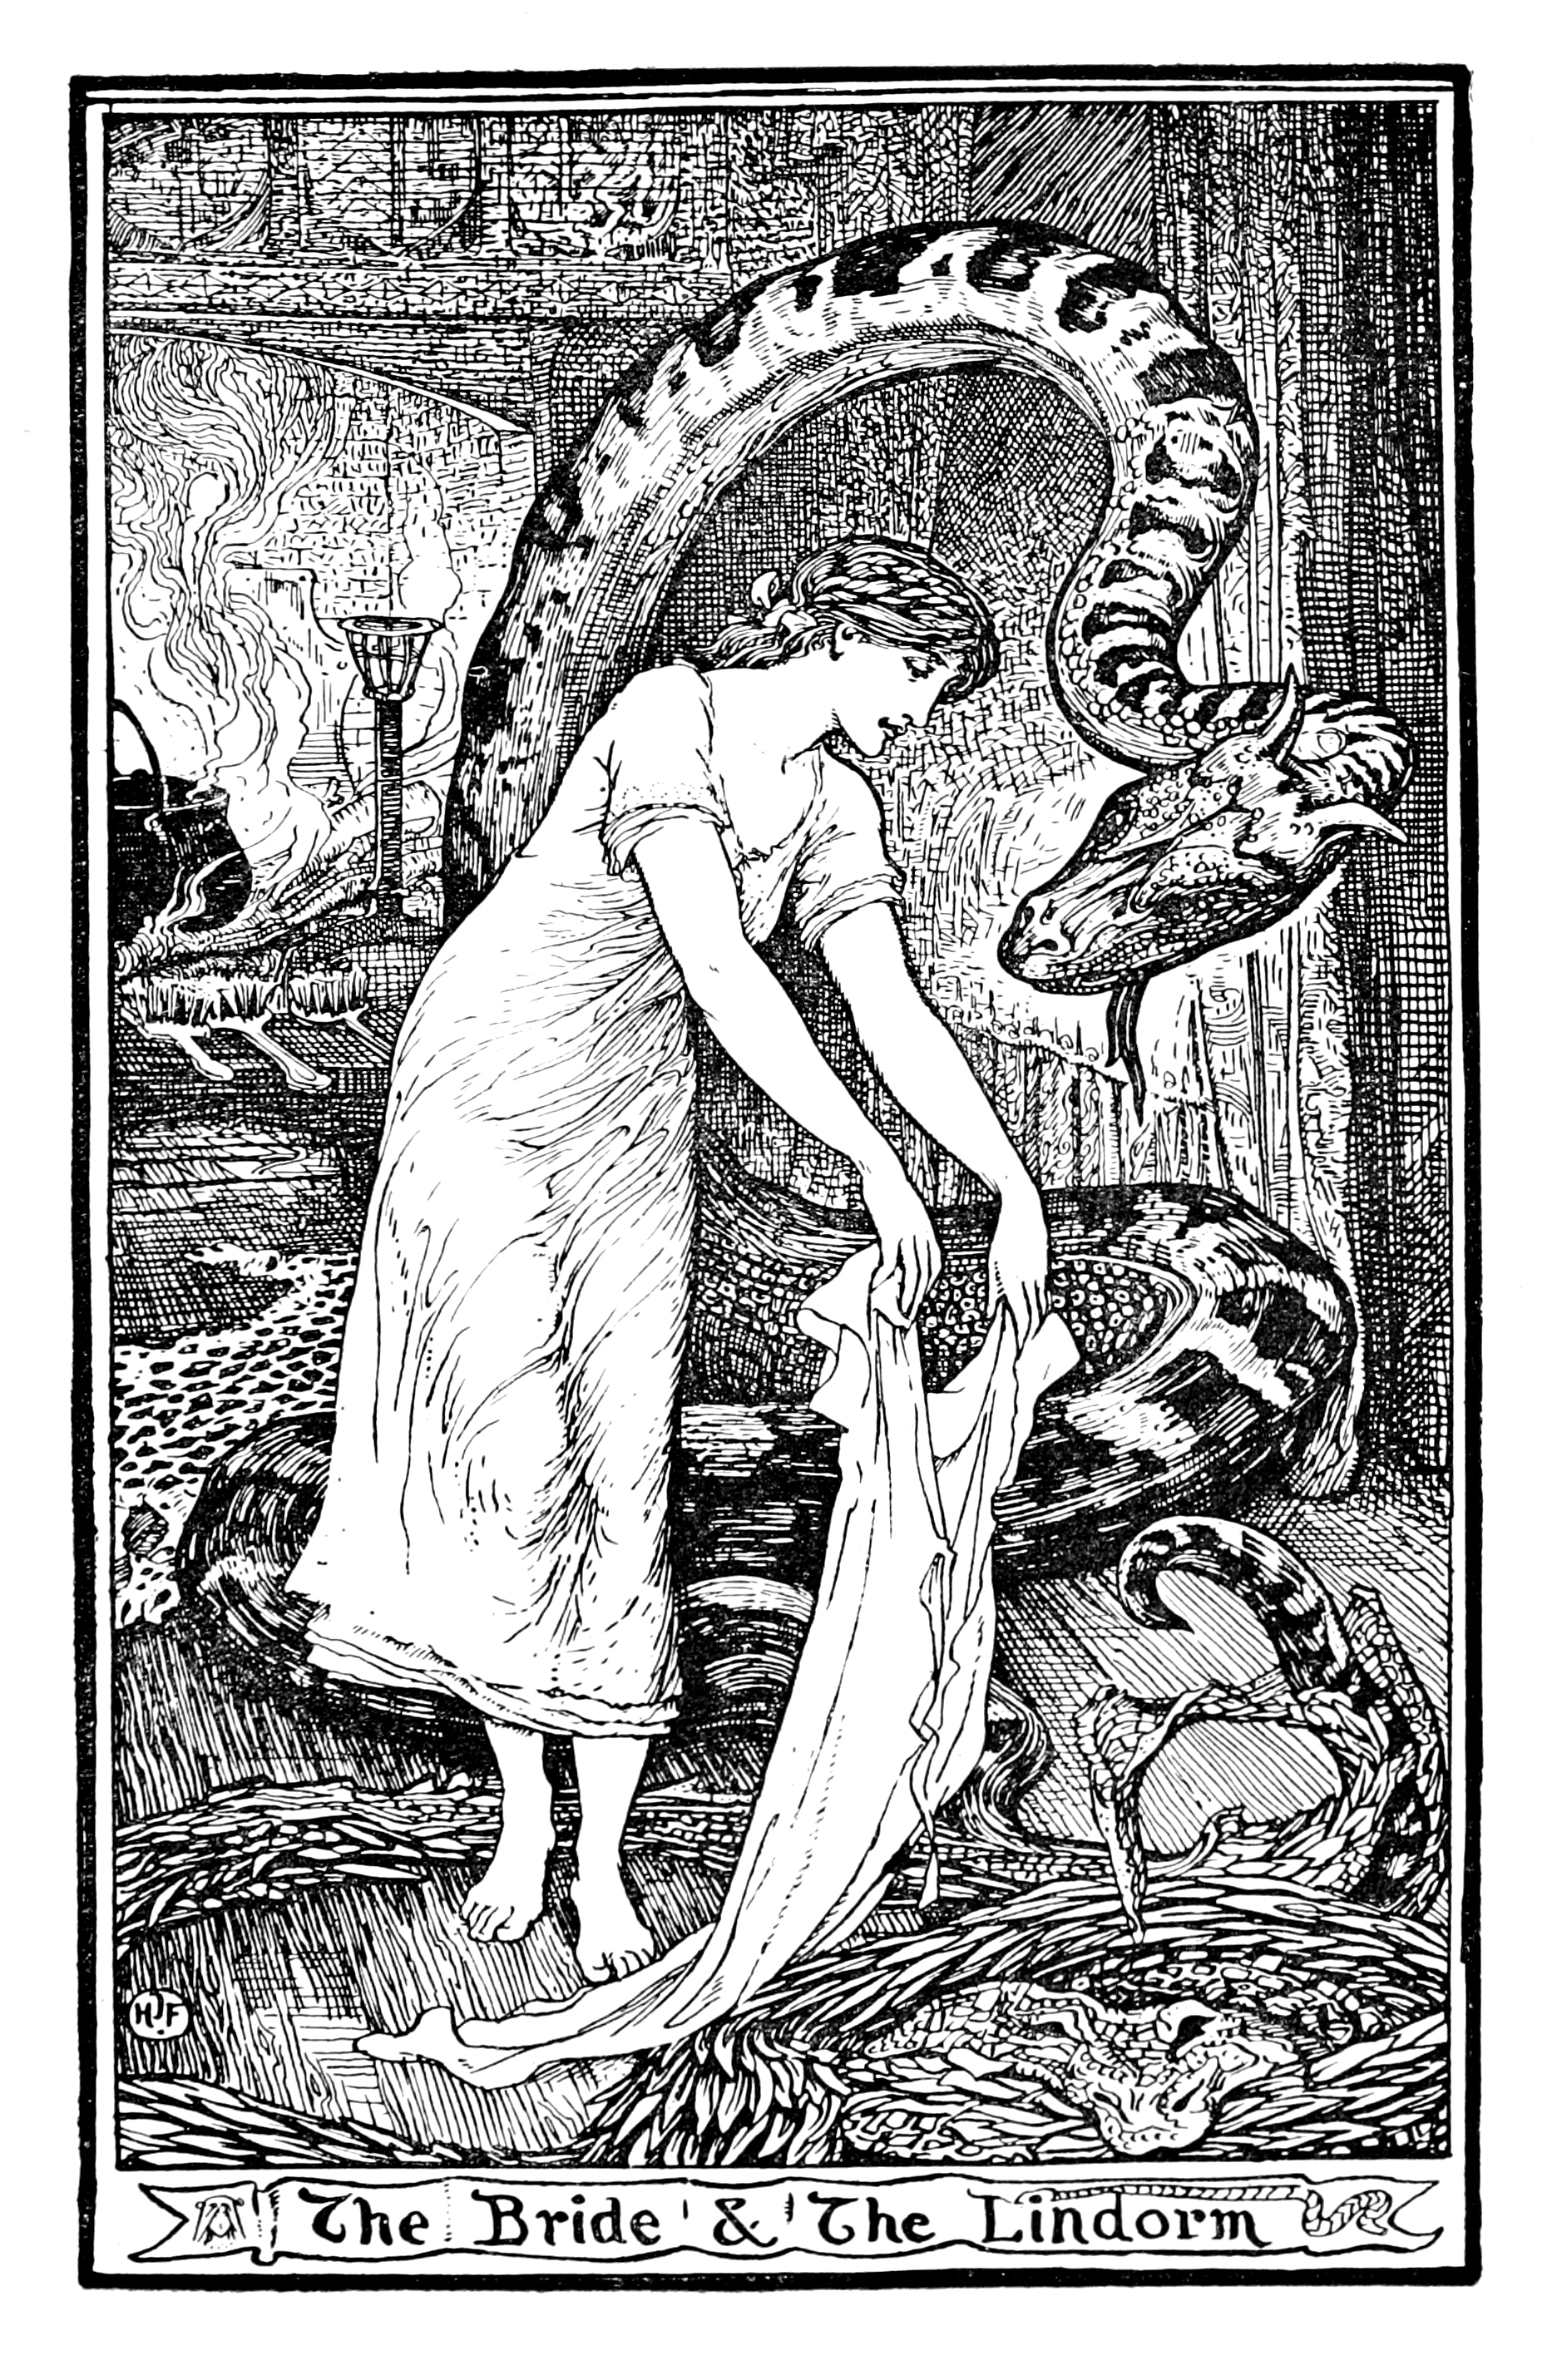 Henry Justice Ford - The pink fairy book, edited by Andrew Lang, 1897 (illustration 15)